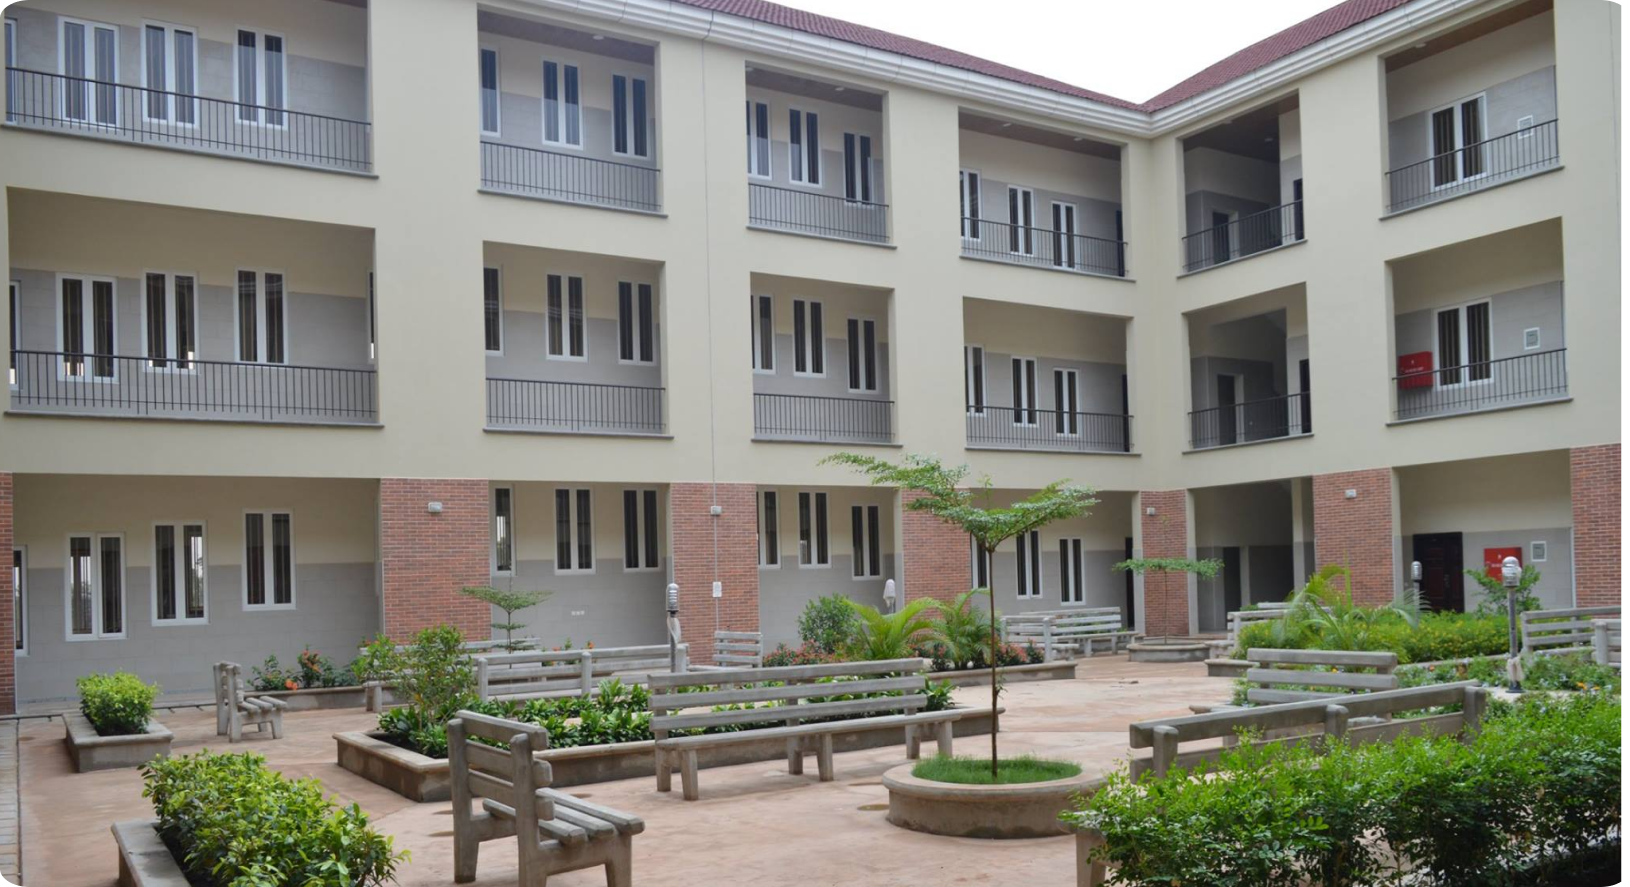 a picture of edo state university uzairue — there are trees and benches